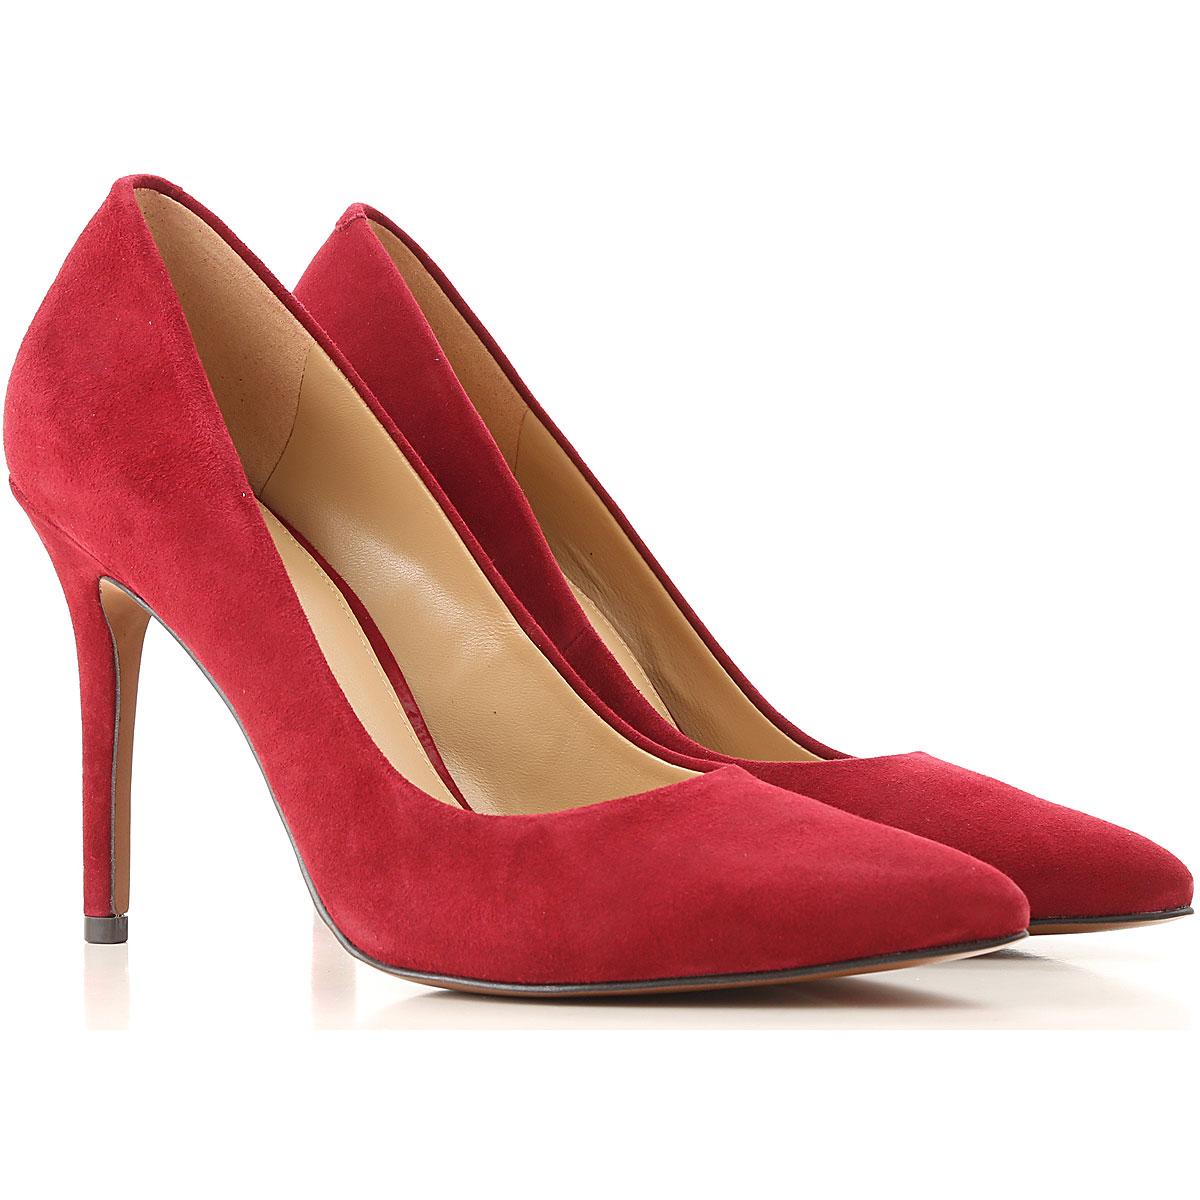 Michael Kors Leather Shoes For Women in Maroon (Red) - Lyst